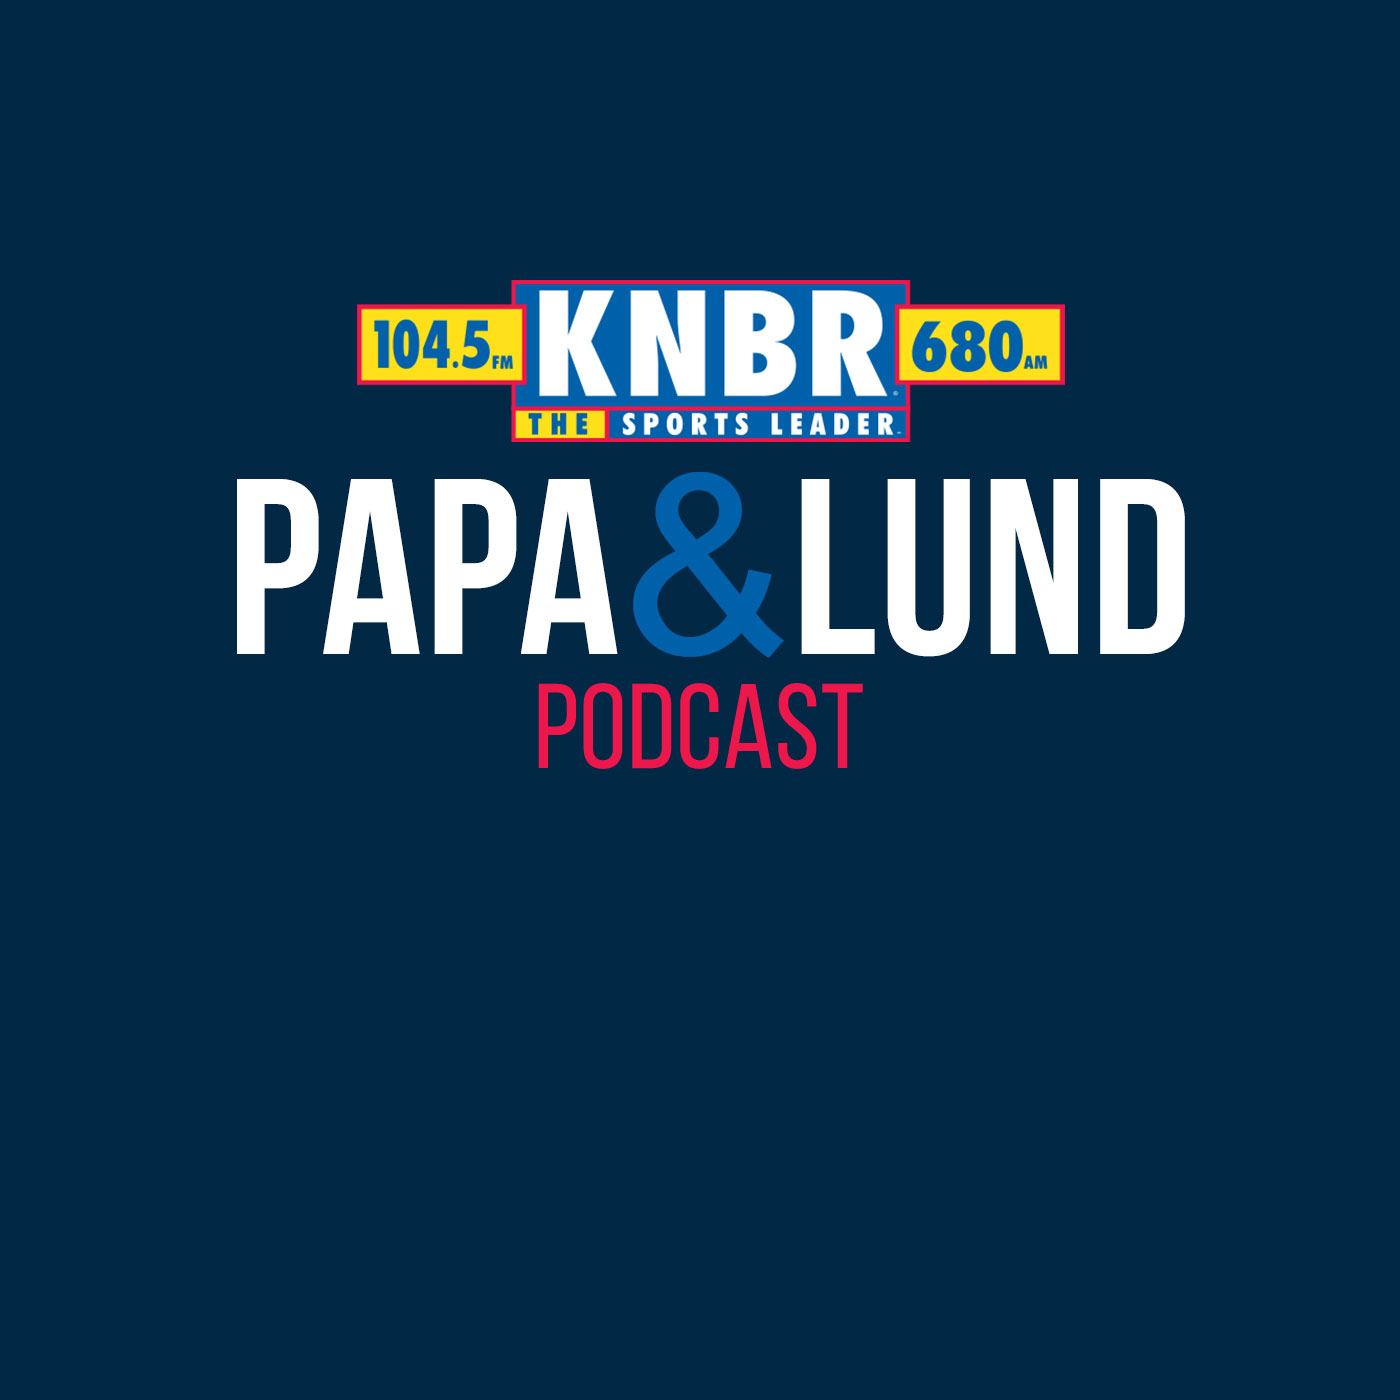 5-17 George Kontos joins Papa & Lund Live from the Public House to discuss the Giants improved bullpen